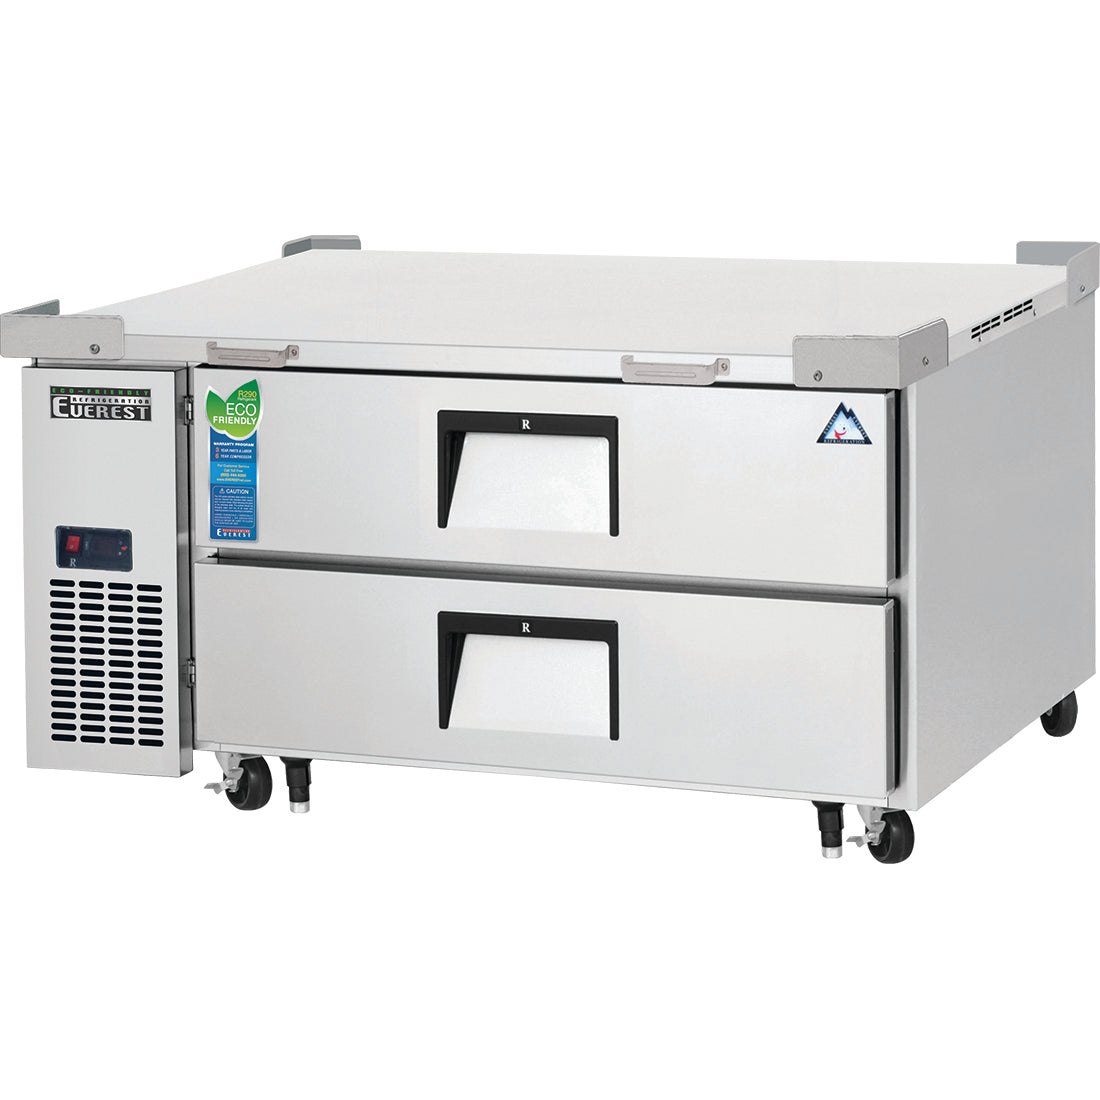 Everest EC Series-ECB48D2 One Section Two Drawer Side Mount Refrigerated Chef Base - 115V